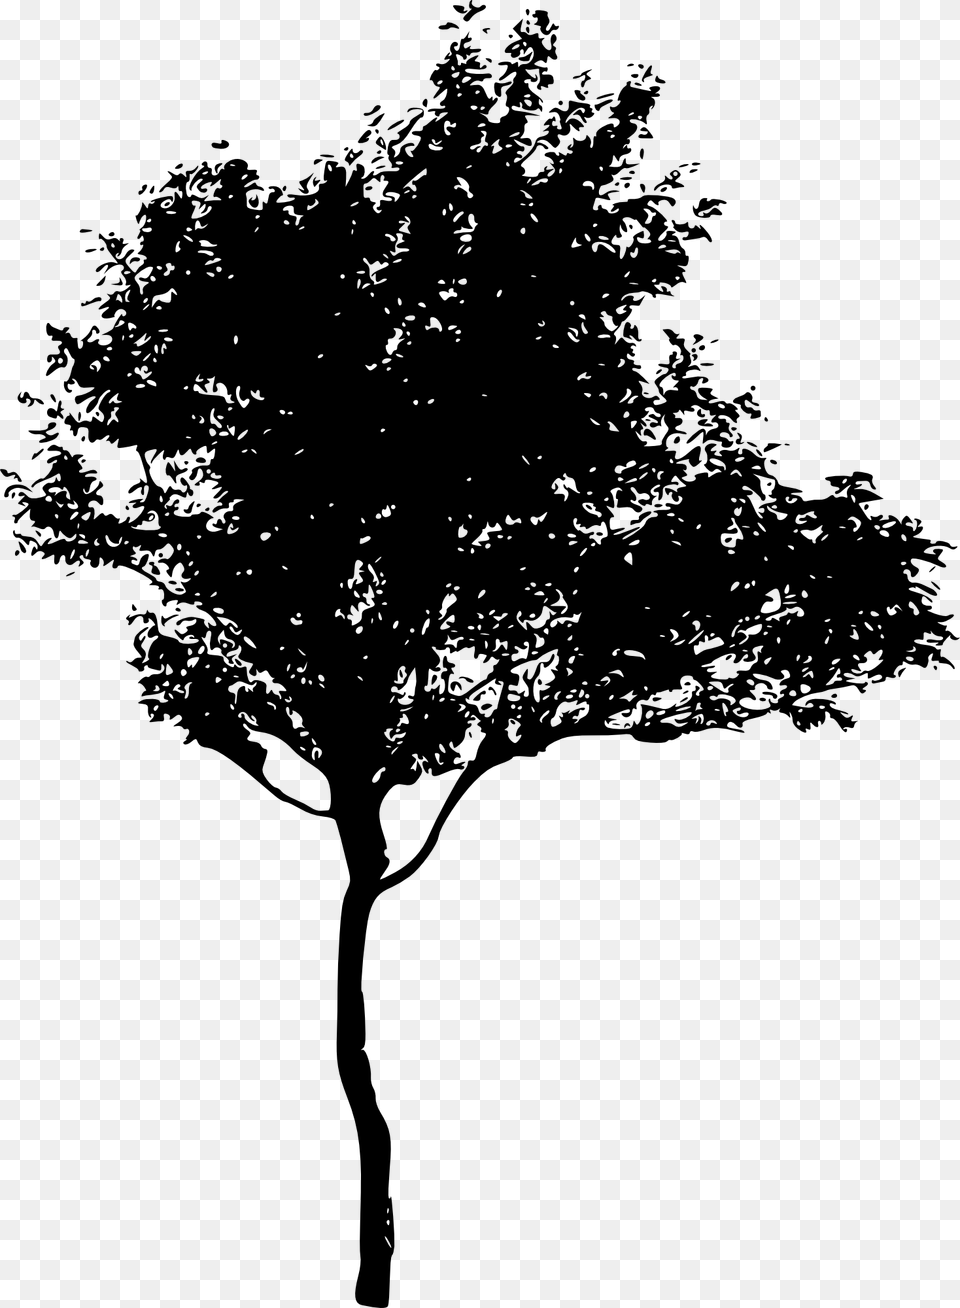 Tree Silhouette 2 Silhouette Of A Tree, Plant, Tree Trunk Free Png Download